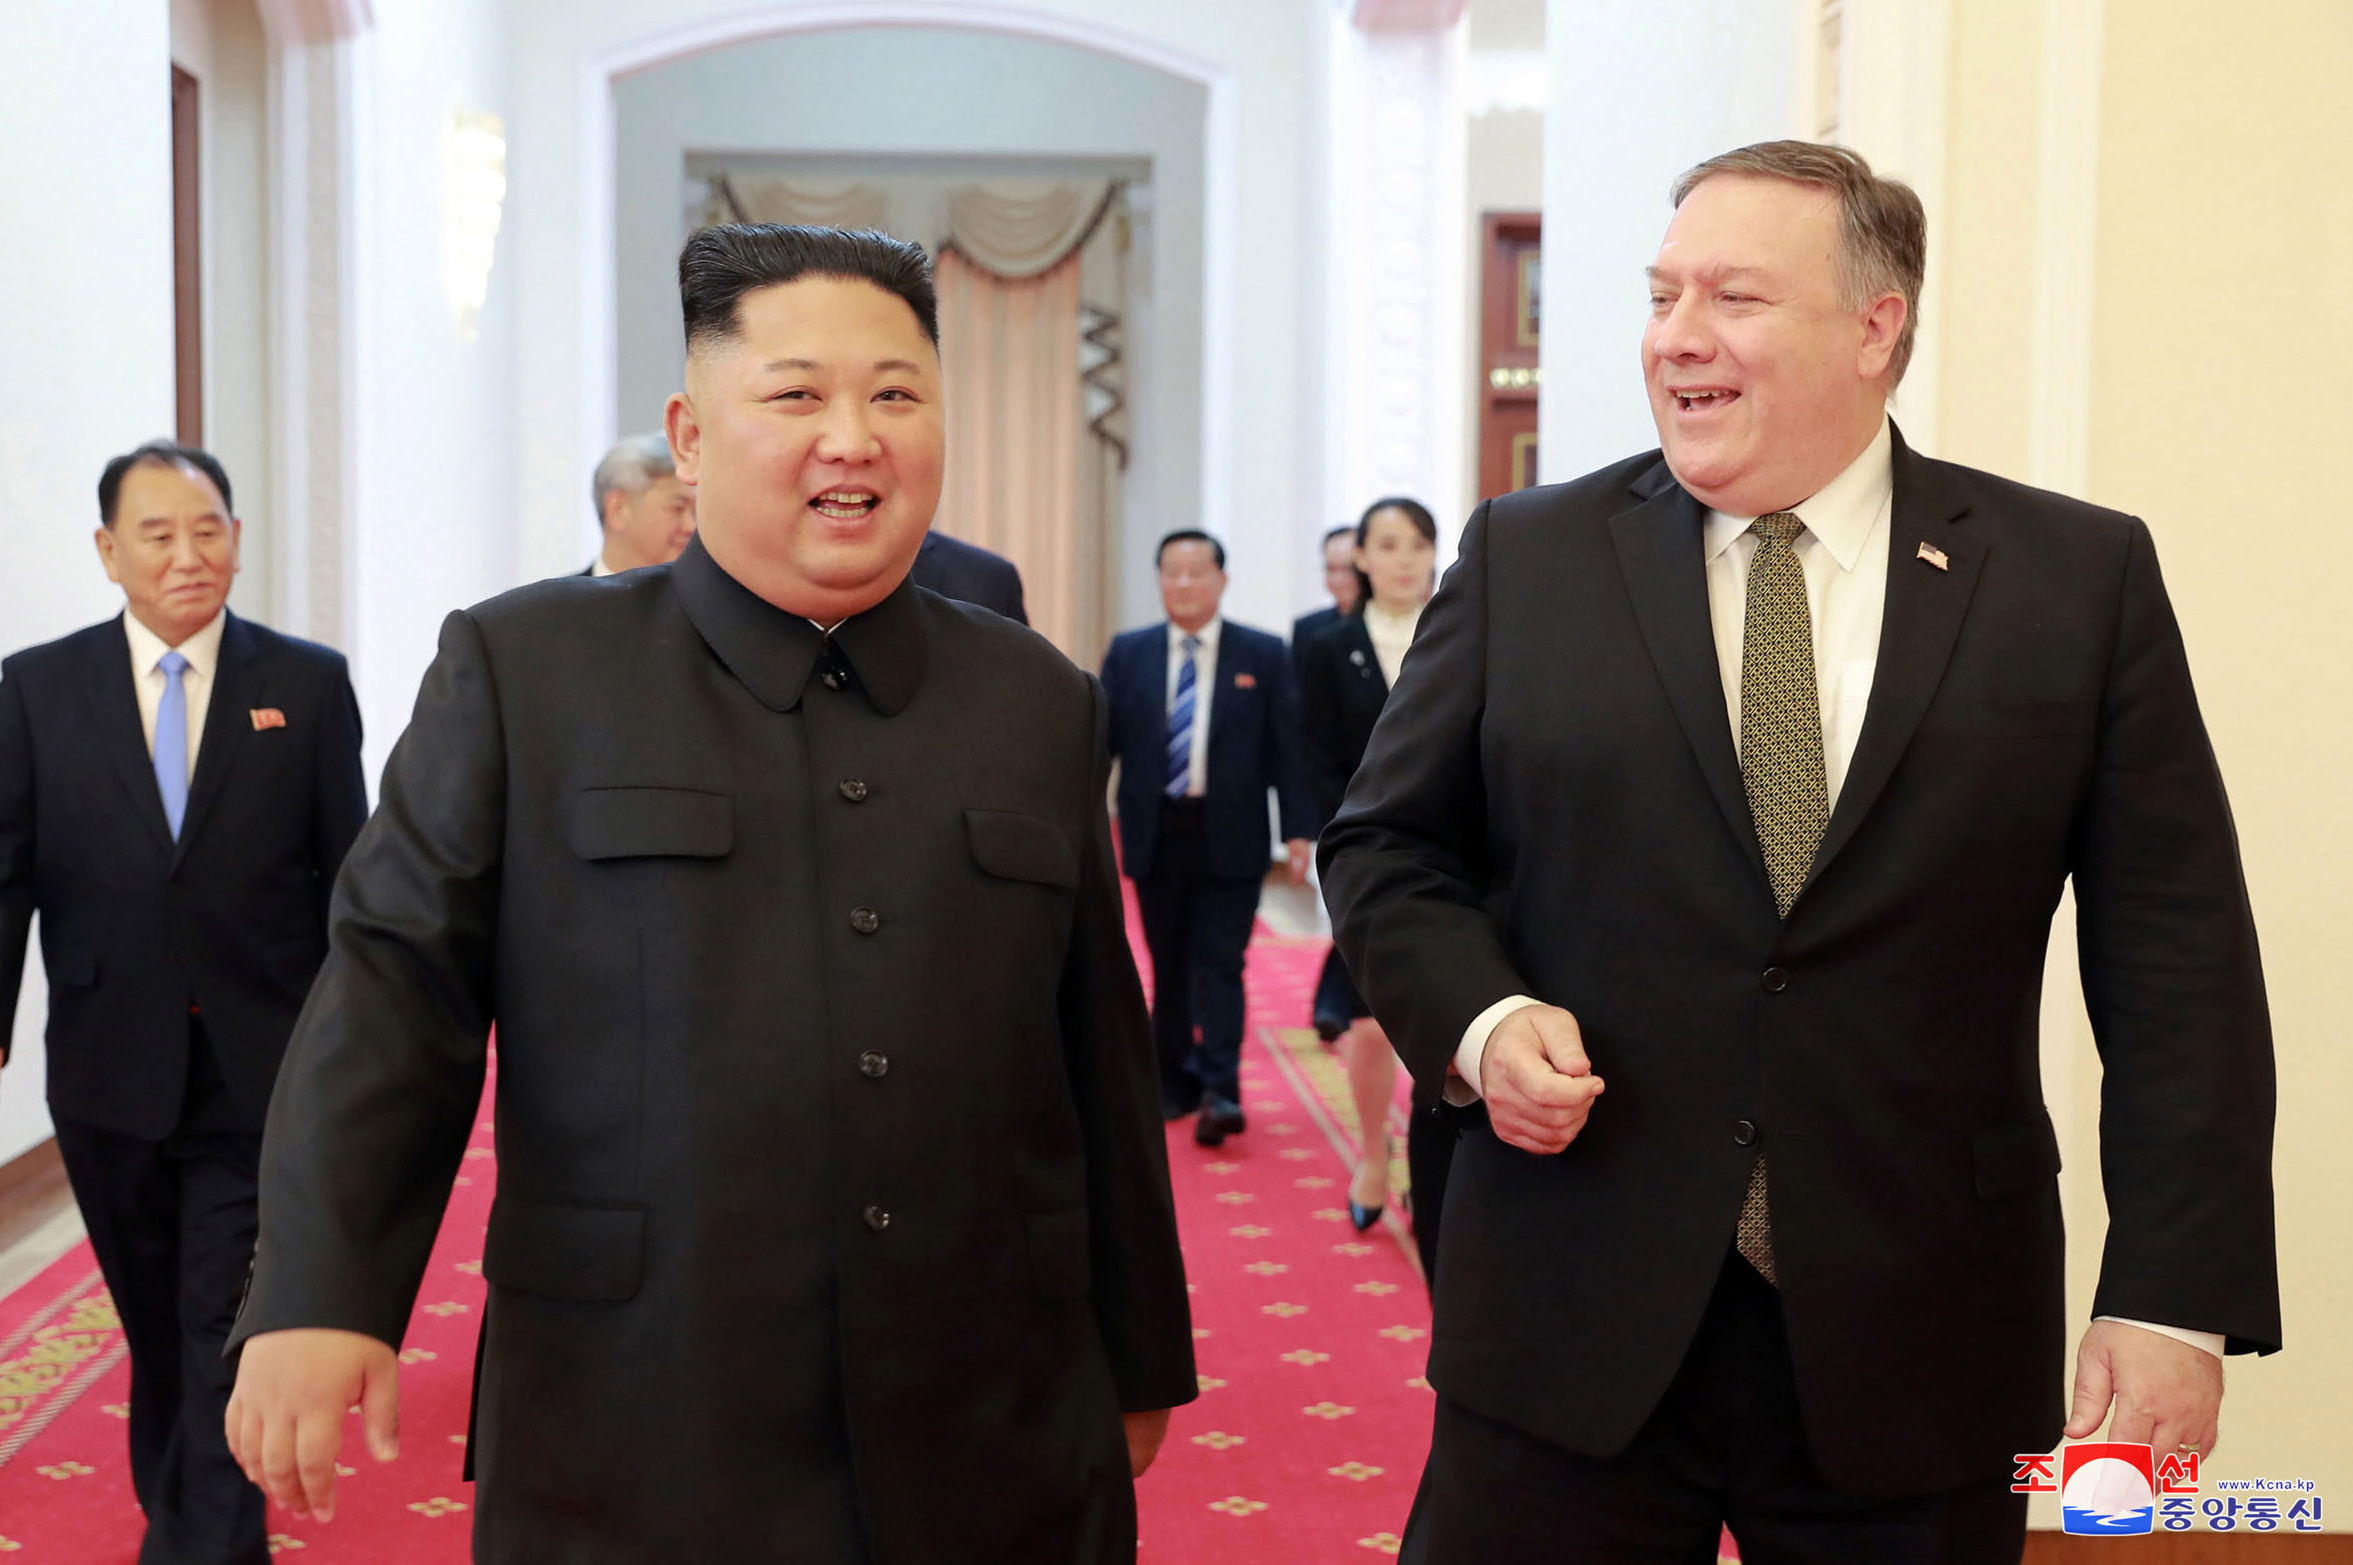 PHOTO: In this photo provided by the North Korean government, North Korean leader Kim Jong Un, center left, and U.S. Secretary of State Mike Pompeo walk together before their meeting in Pyongyang, North Korea, Sunday, Oct. 7, 2018.